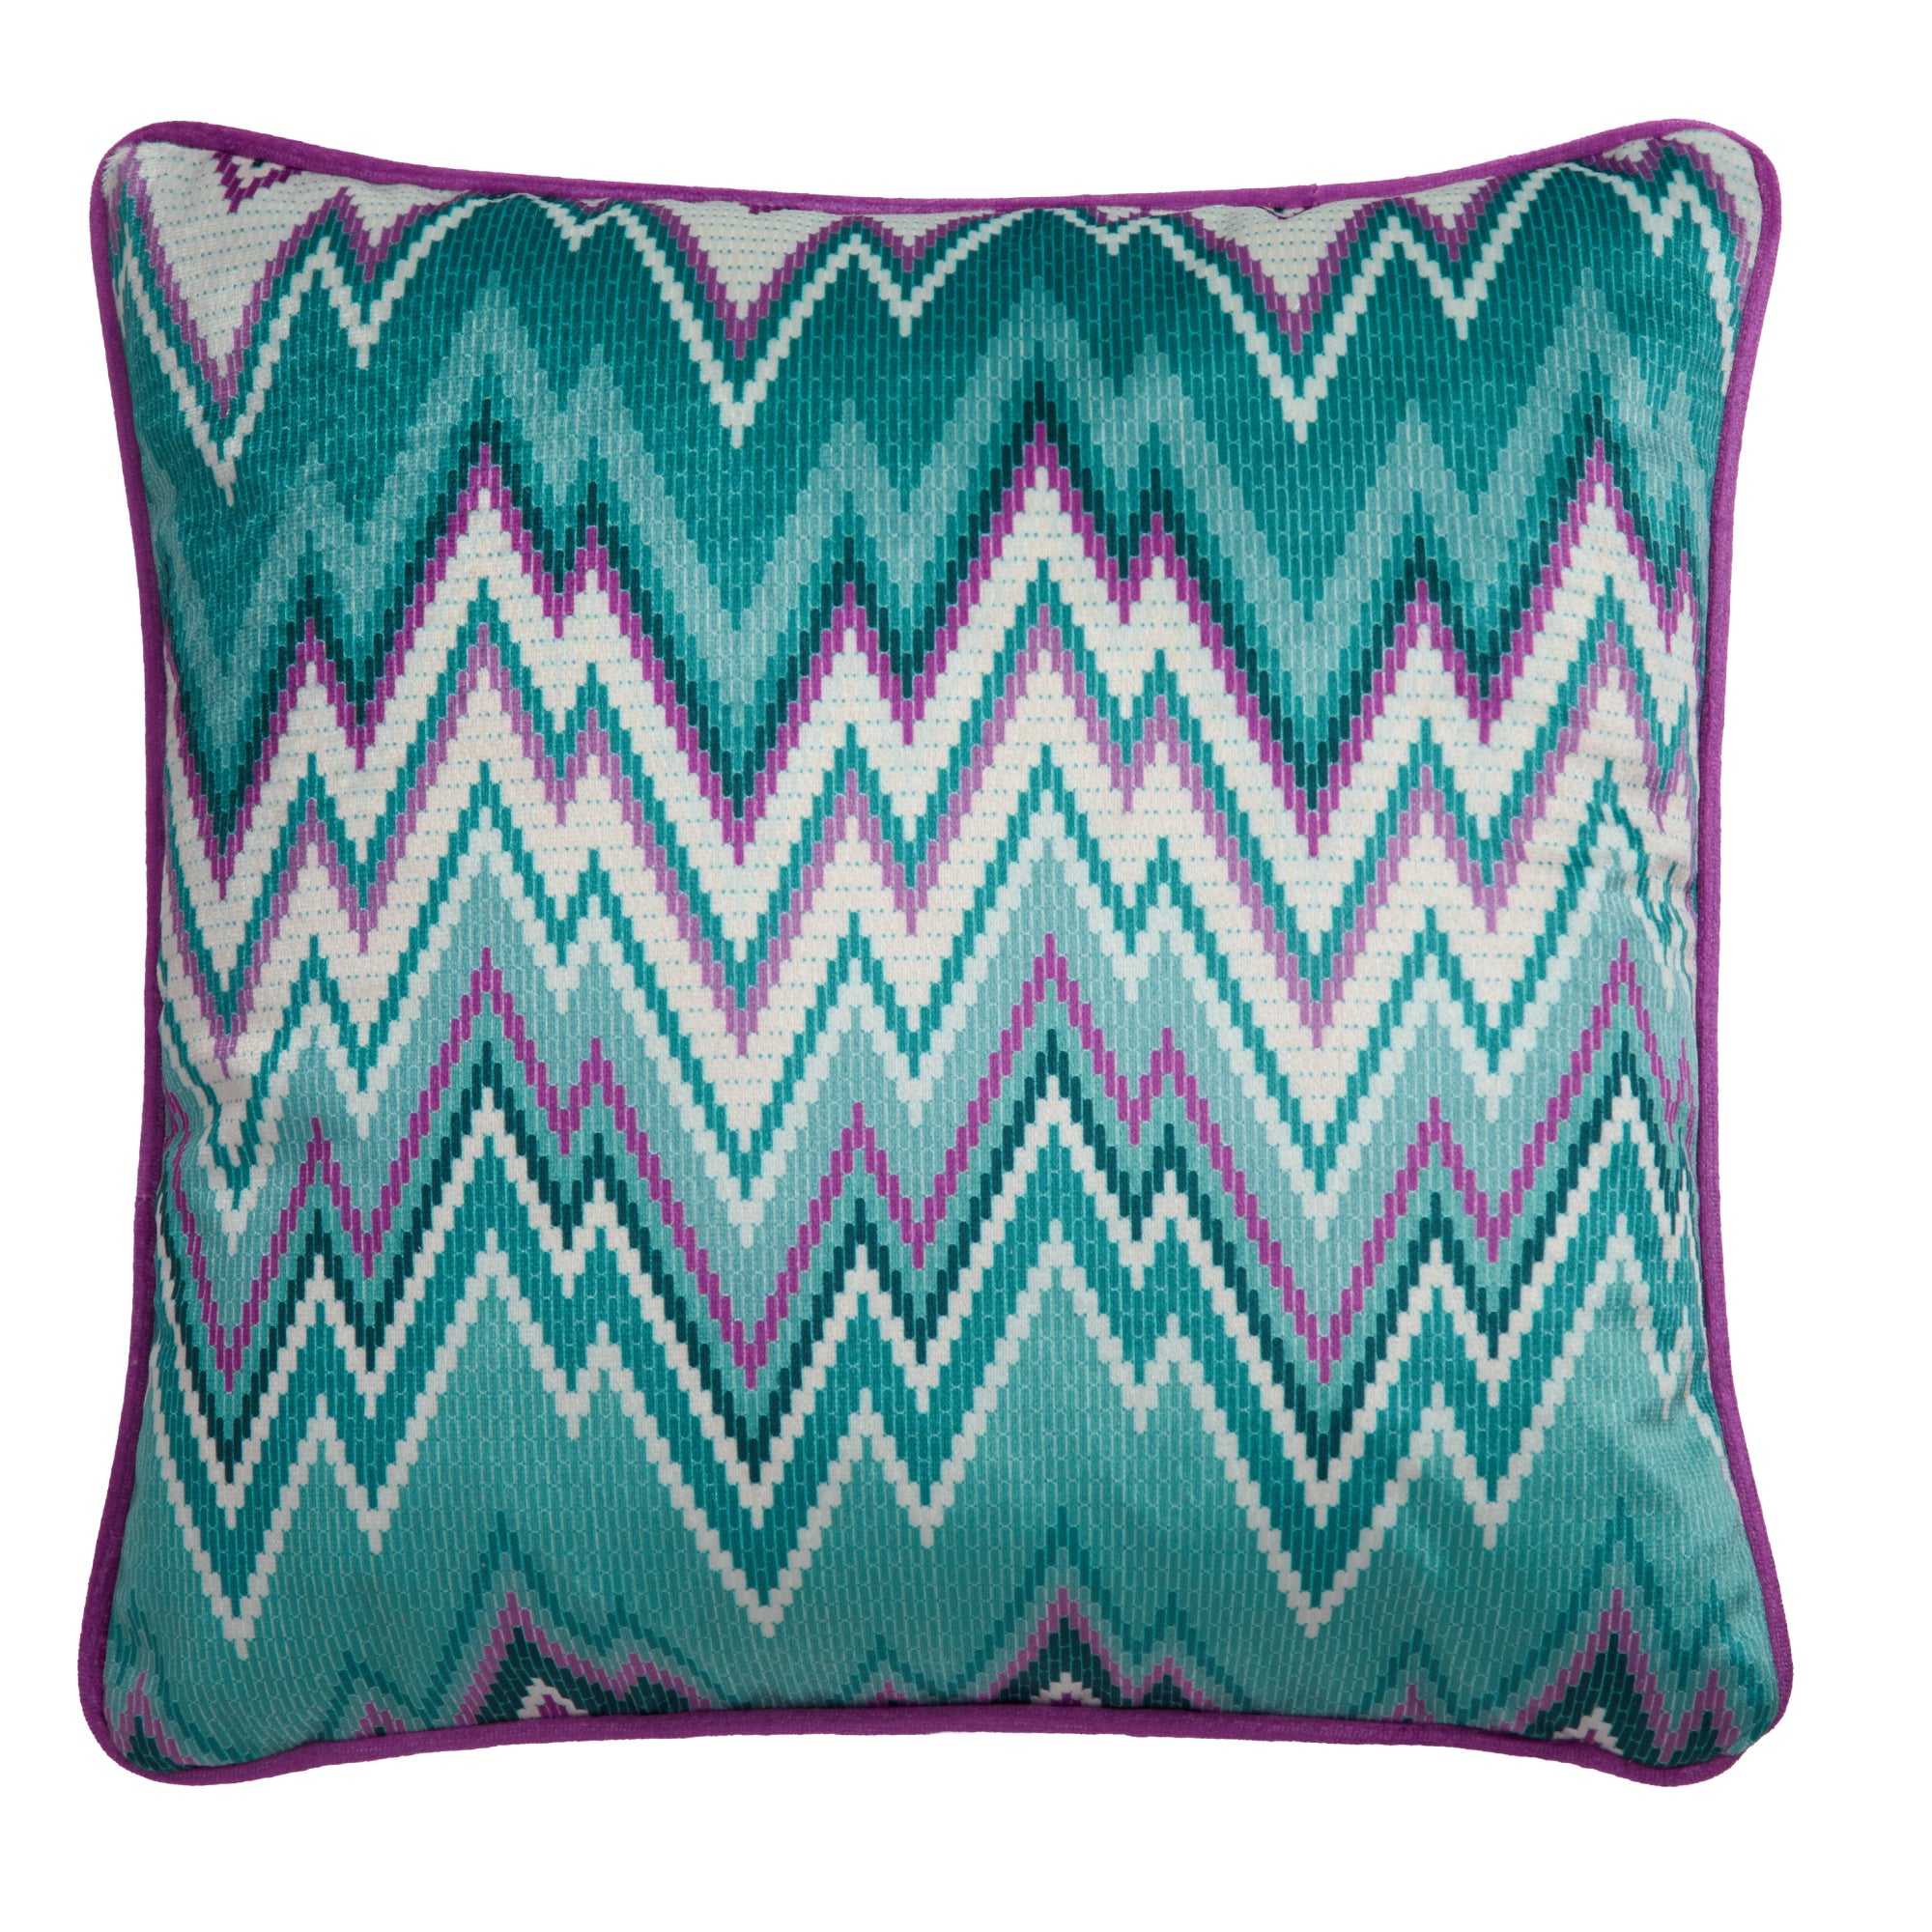 Filled Cushion Pants on Fire by Laurence Llewelyn-Bowen in Blue